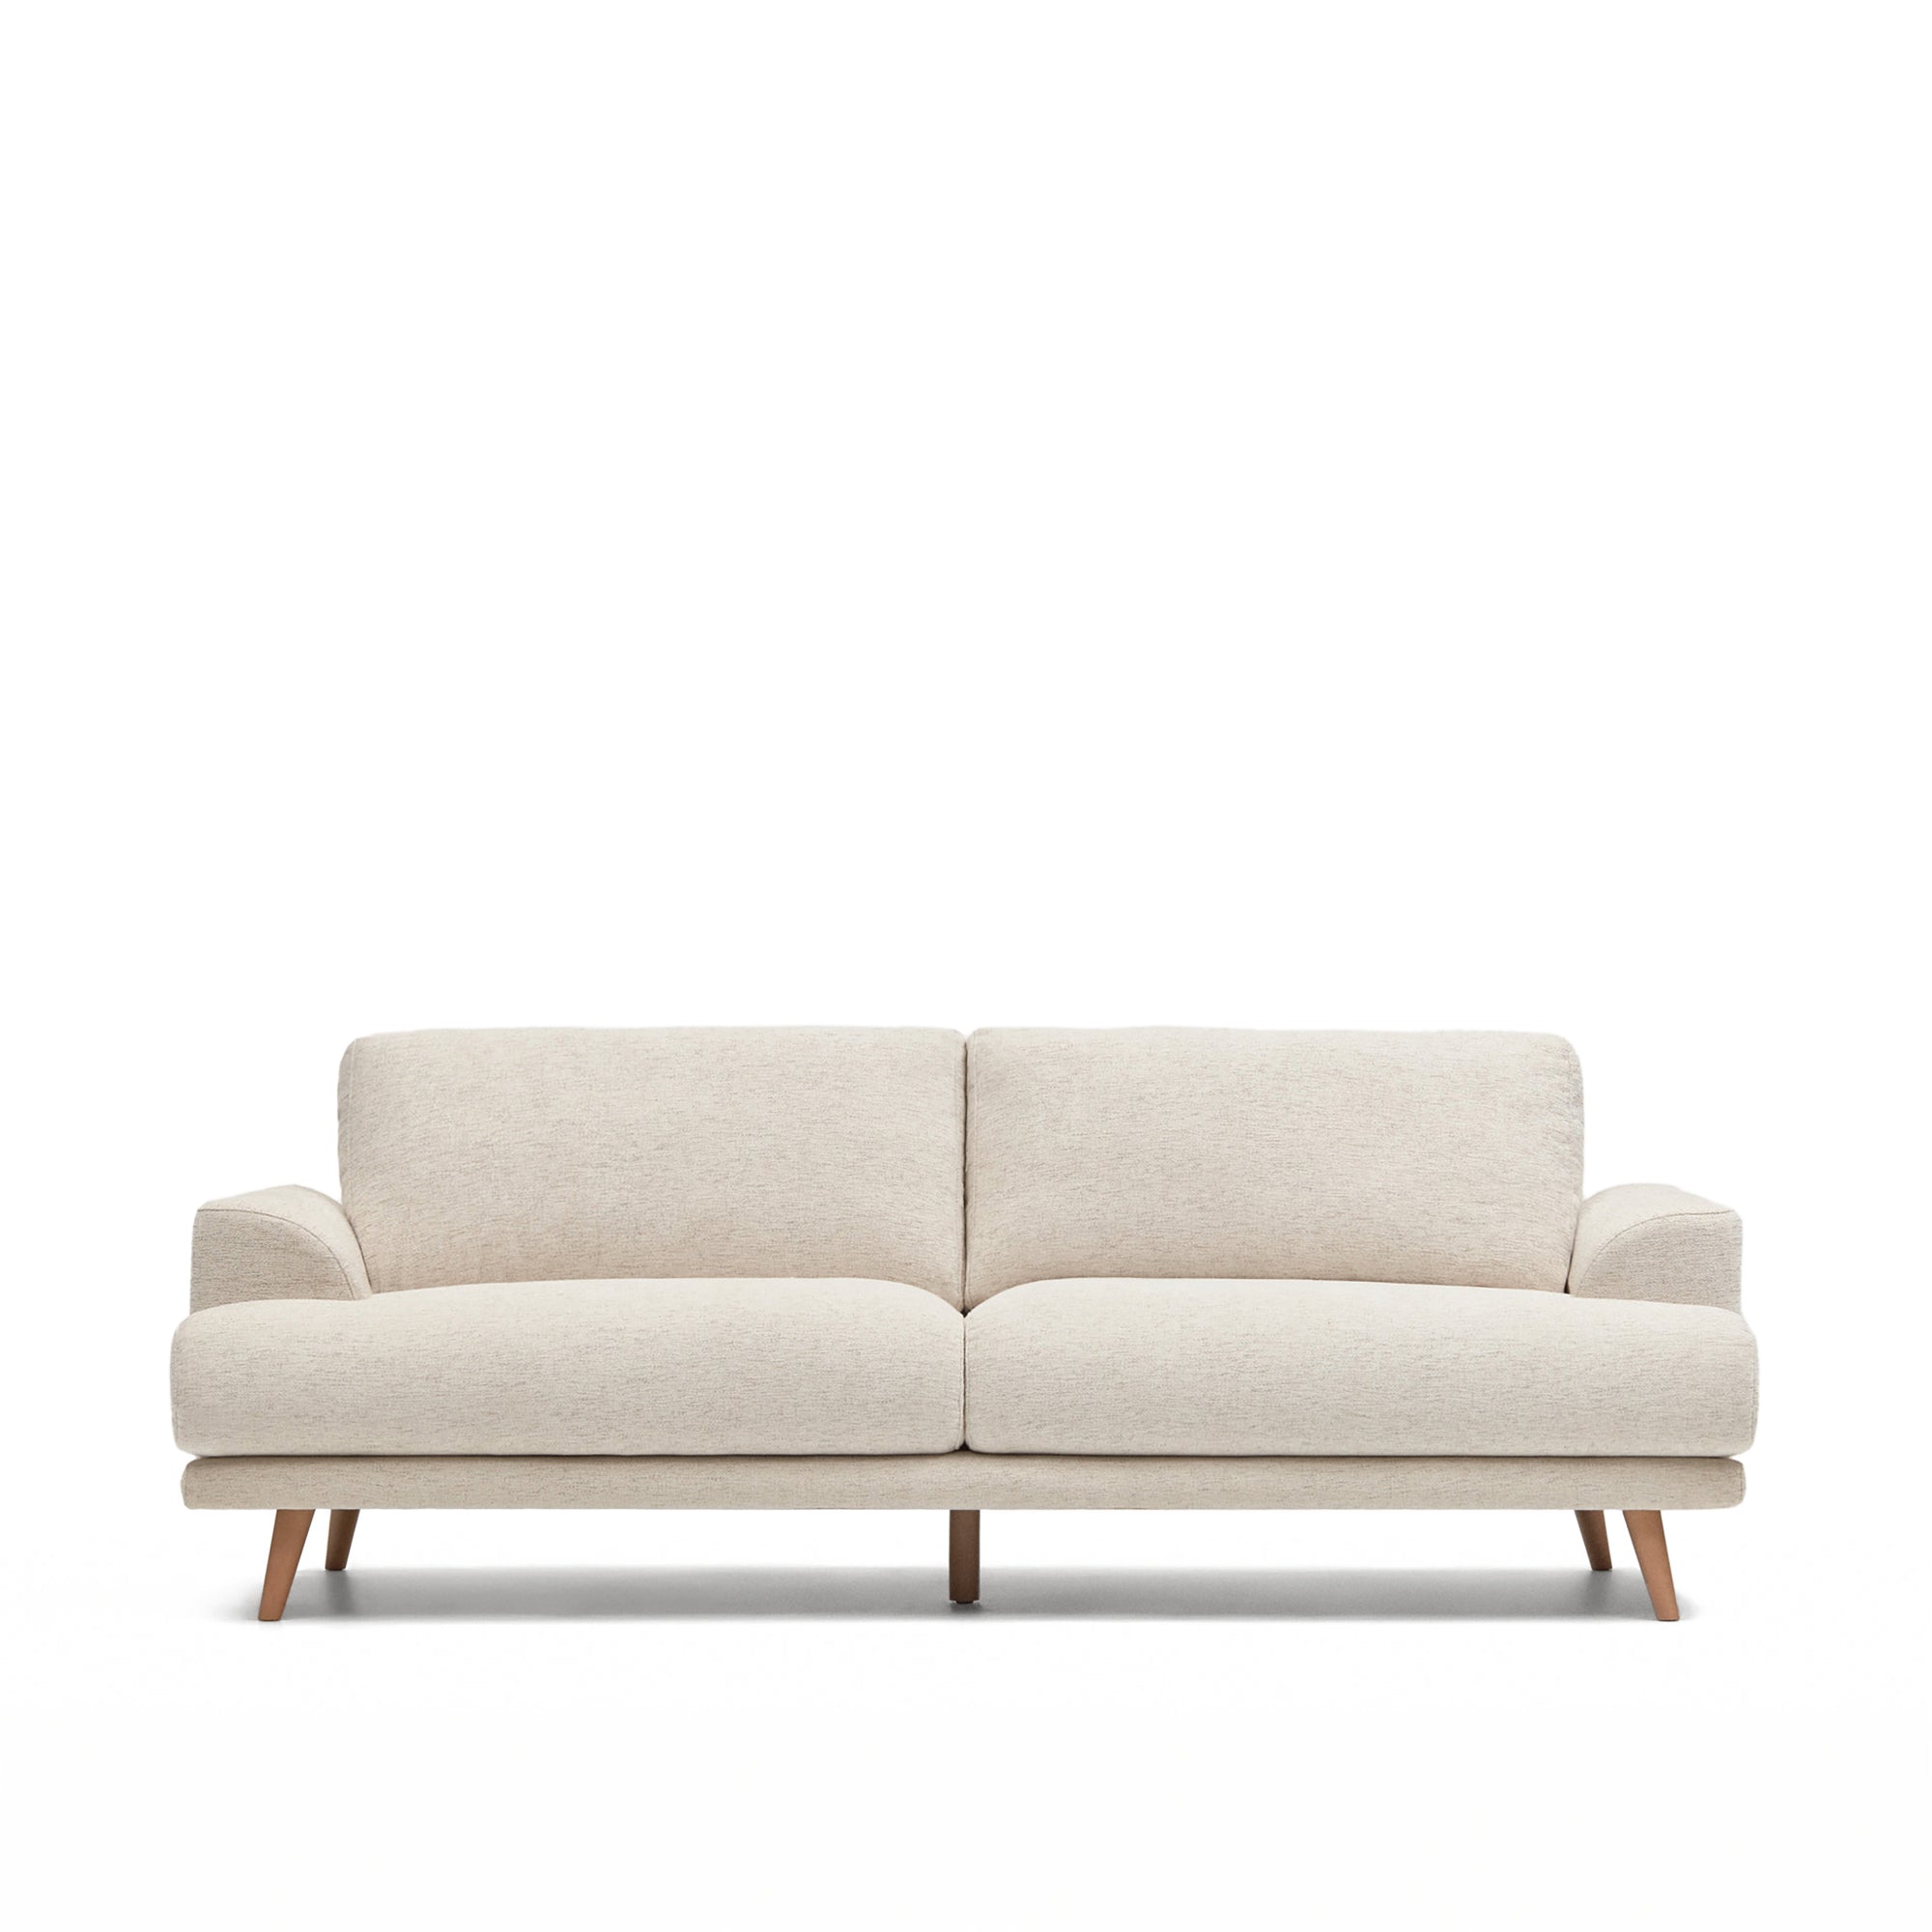 Karin 3 seater sofa in beige with solid beech wood legs, 231 cm